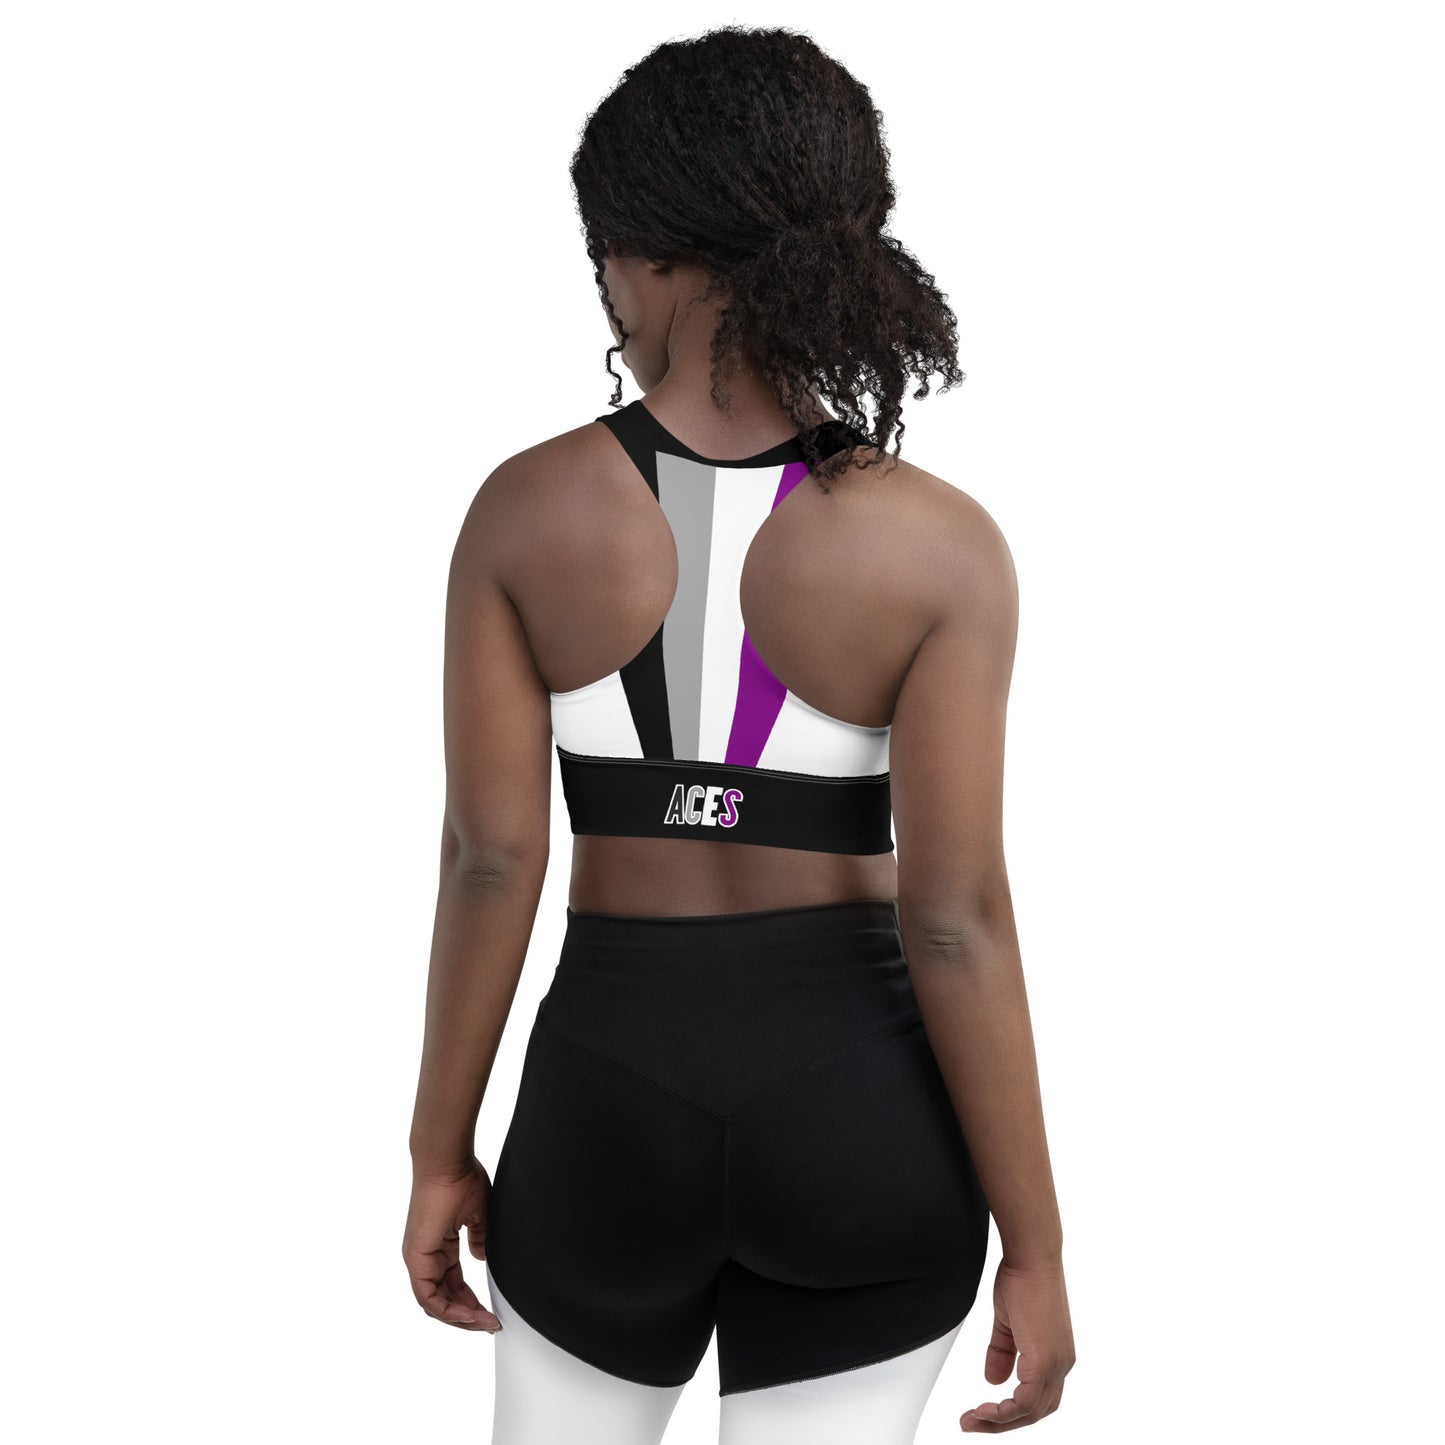 Aces Asexual Pride Flag Sports Bra